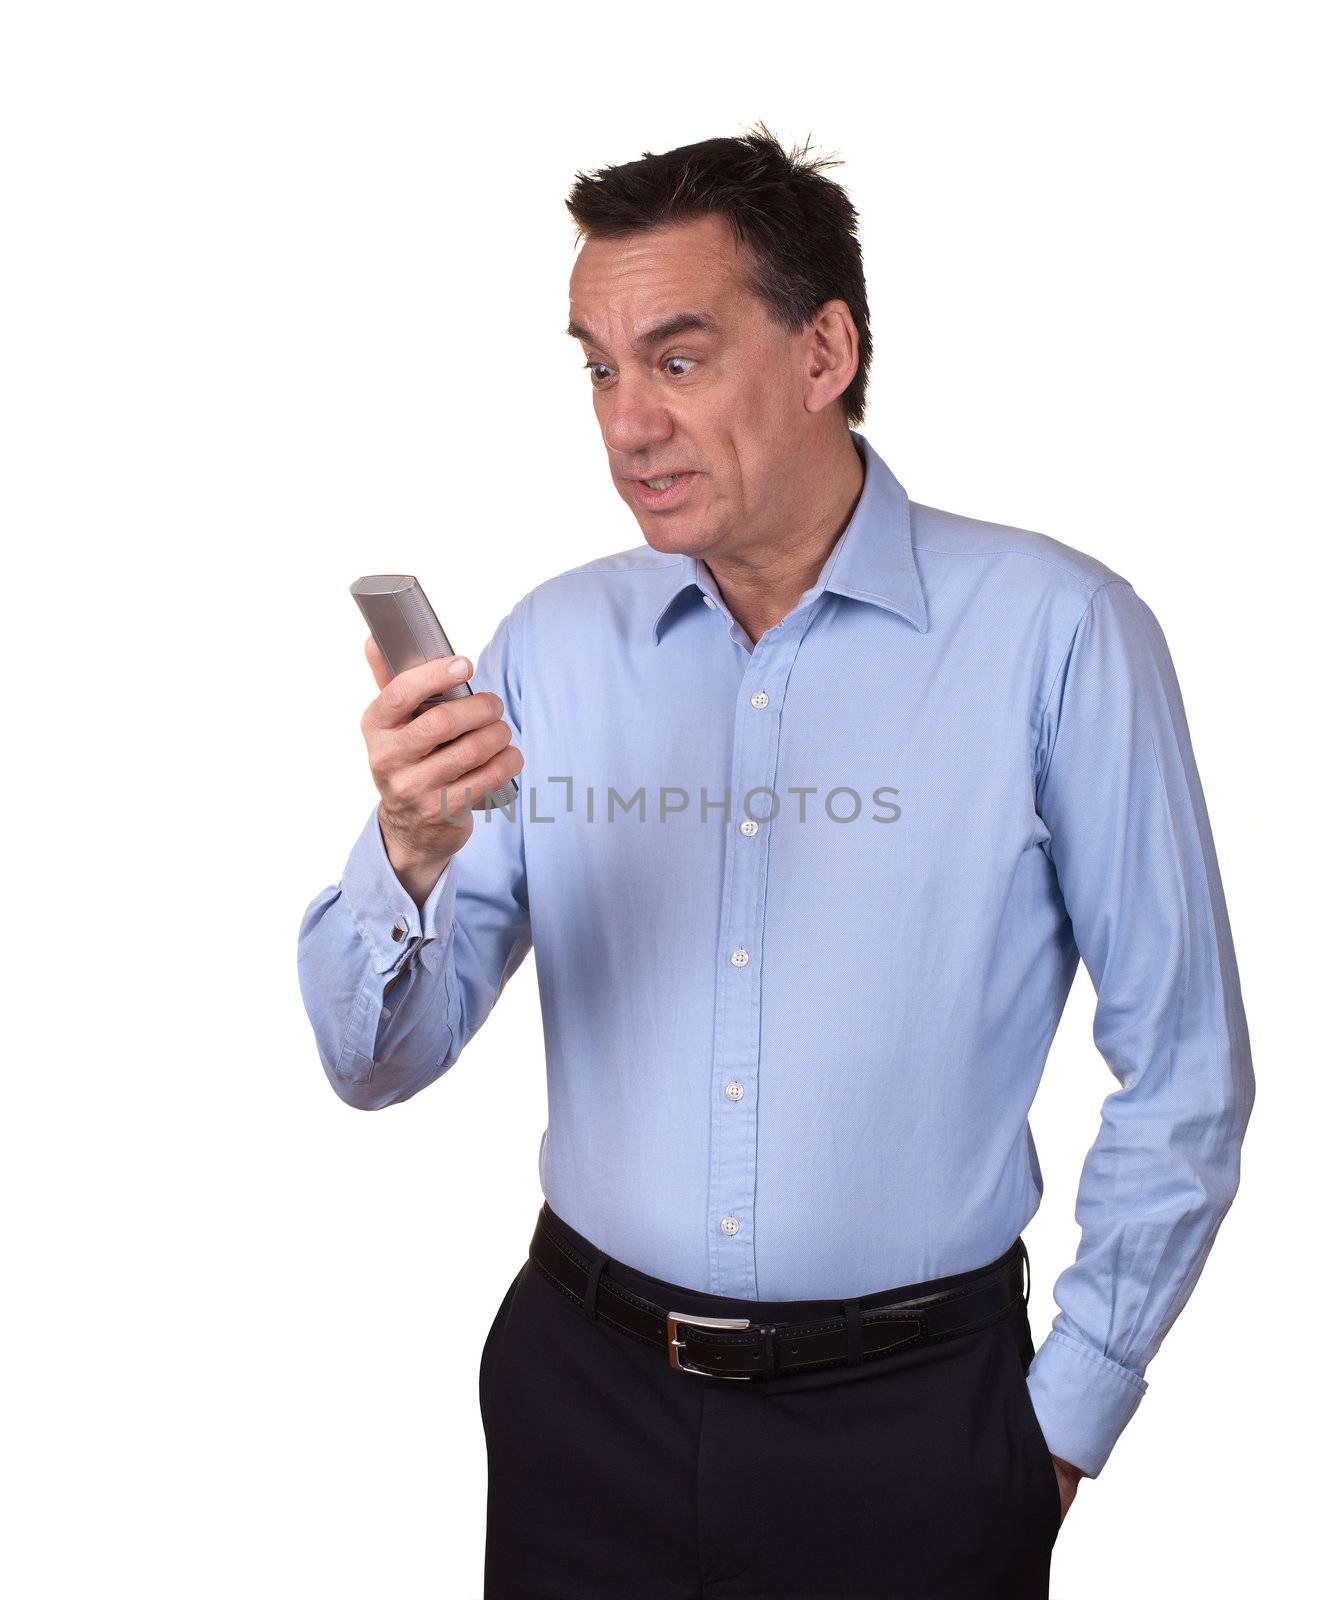 Attractive Man Looking at Phone in Horror by scheriton